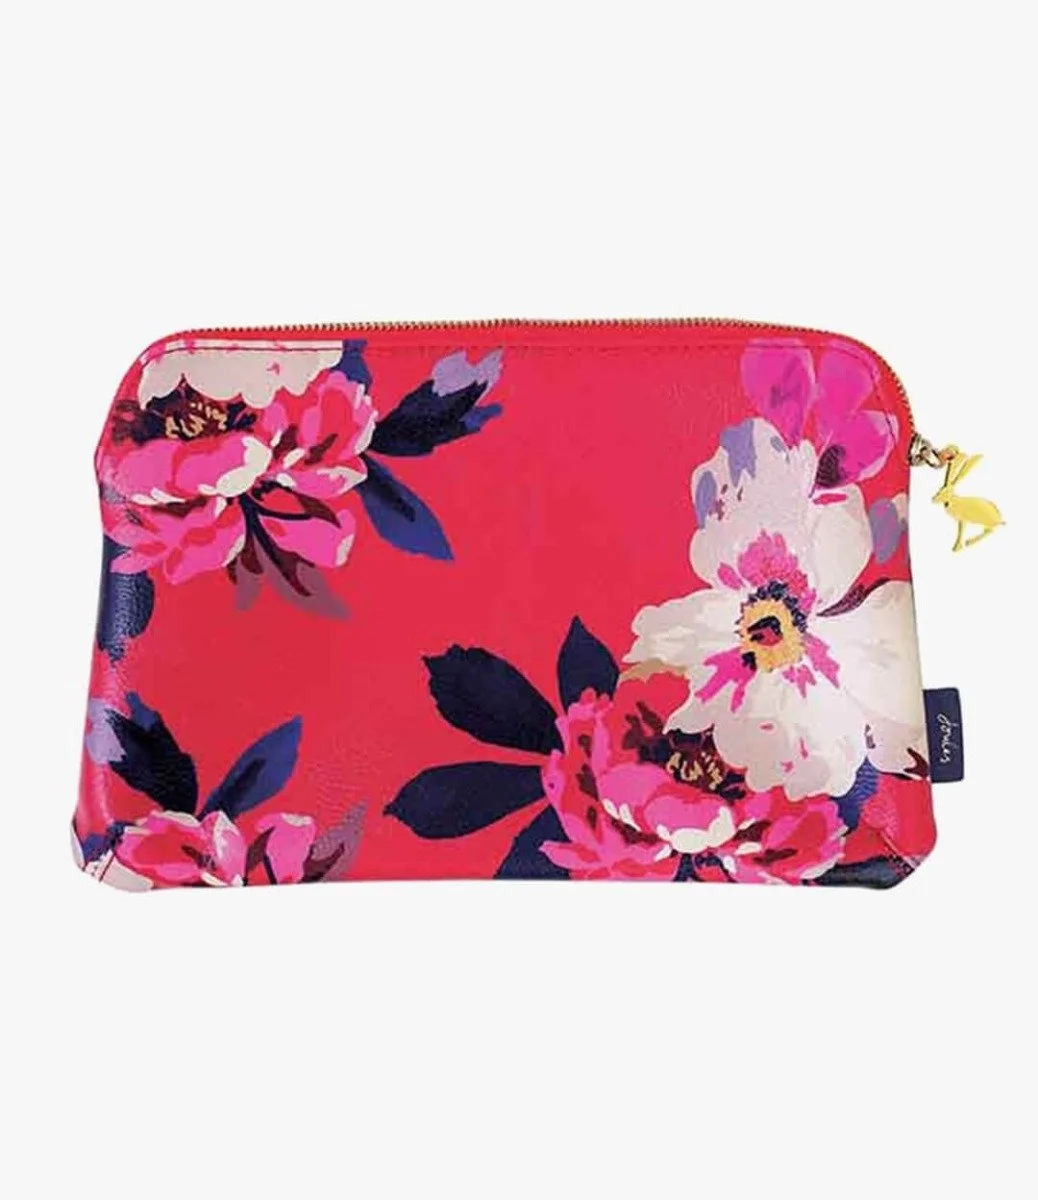 Medium Pouch by Joules